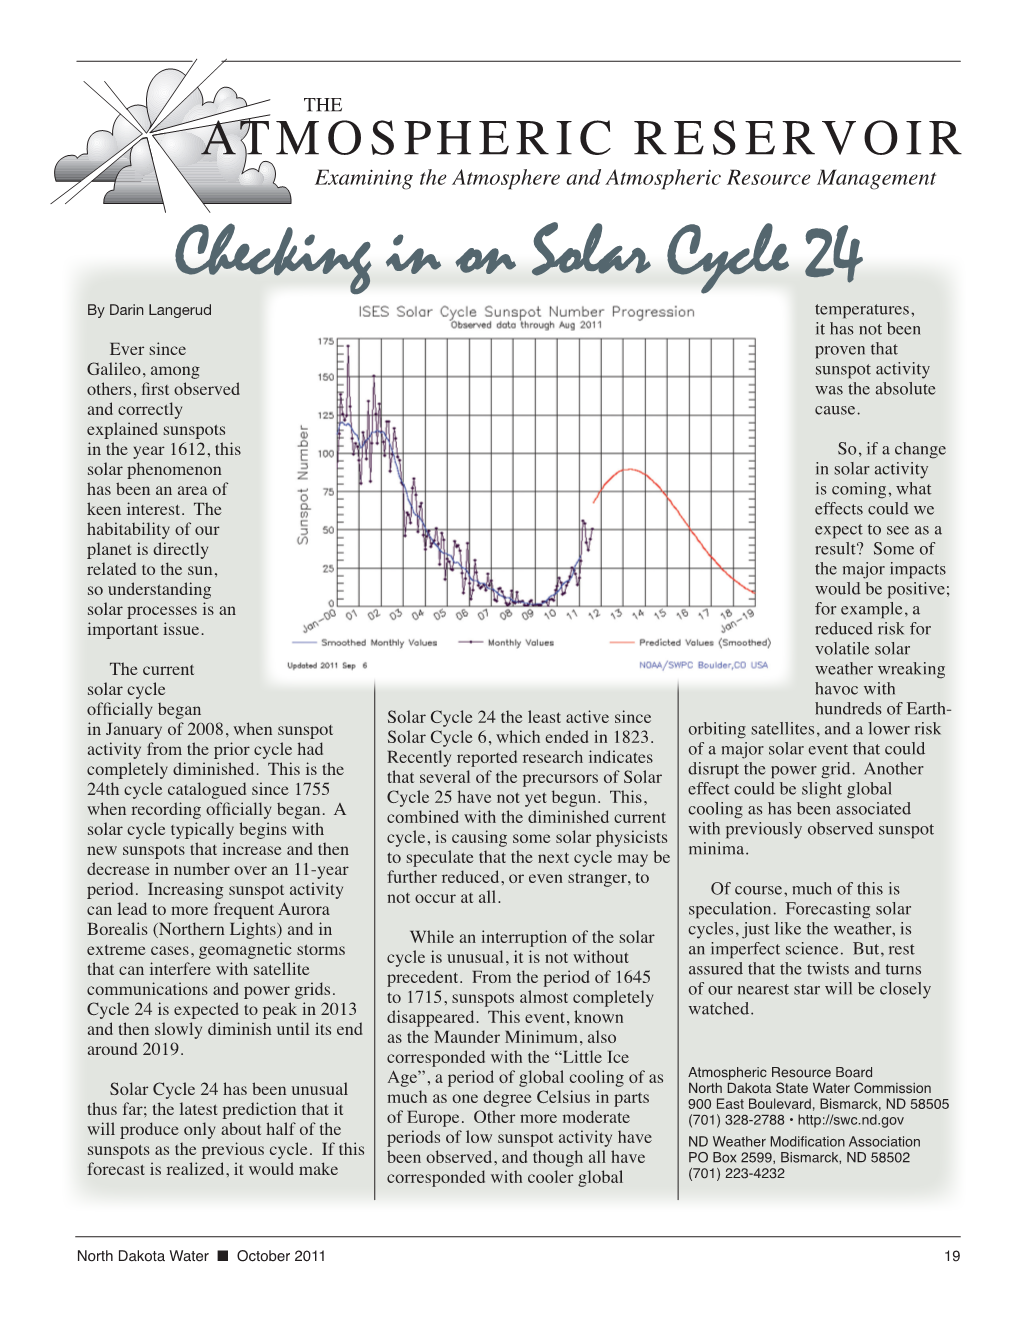 Checking in on Solar Cycle 24